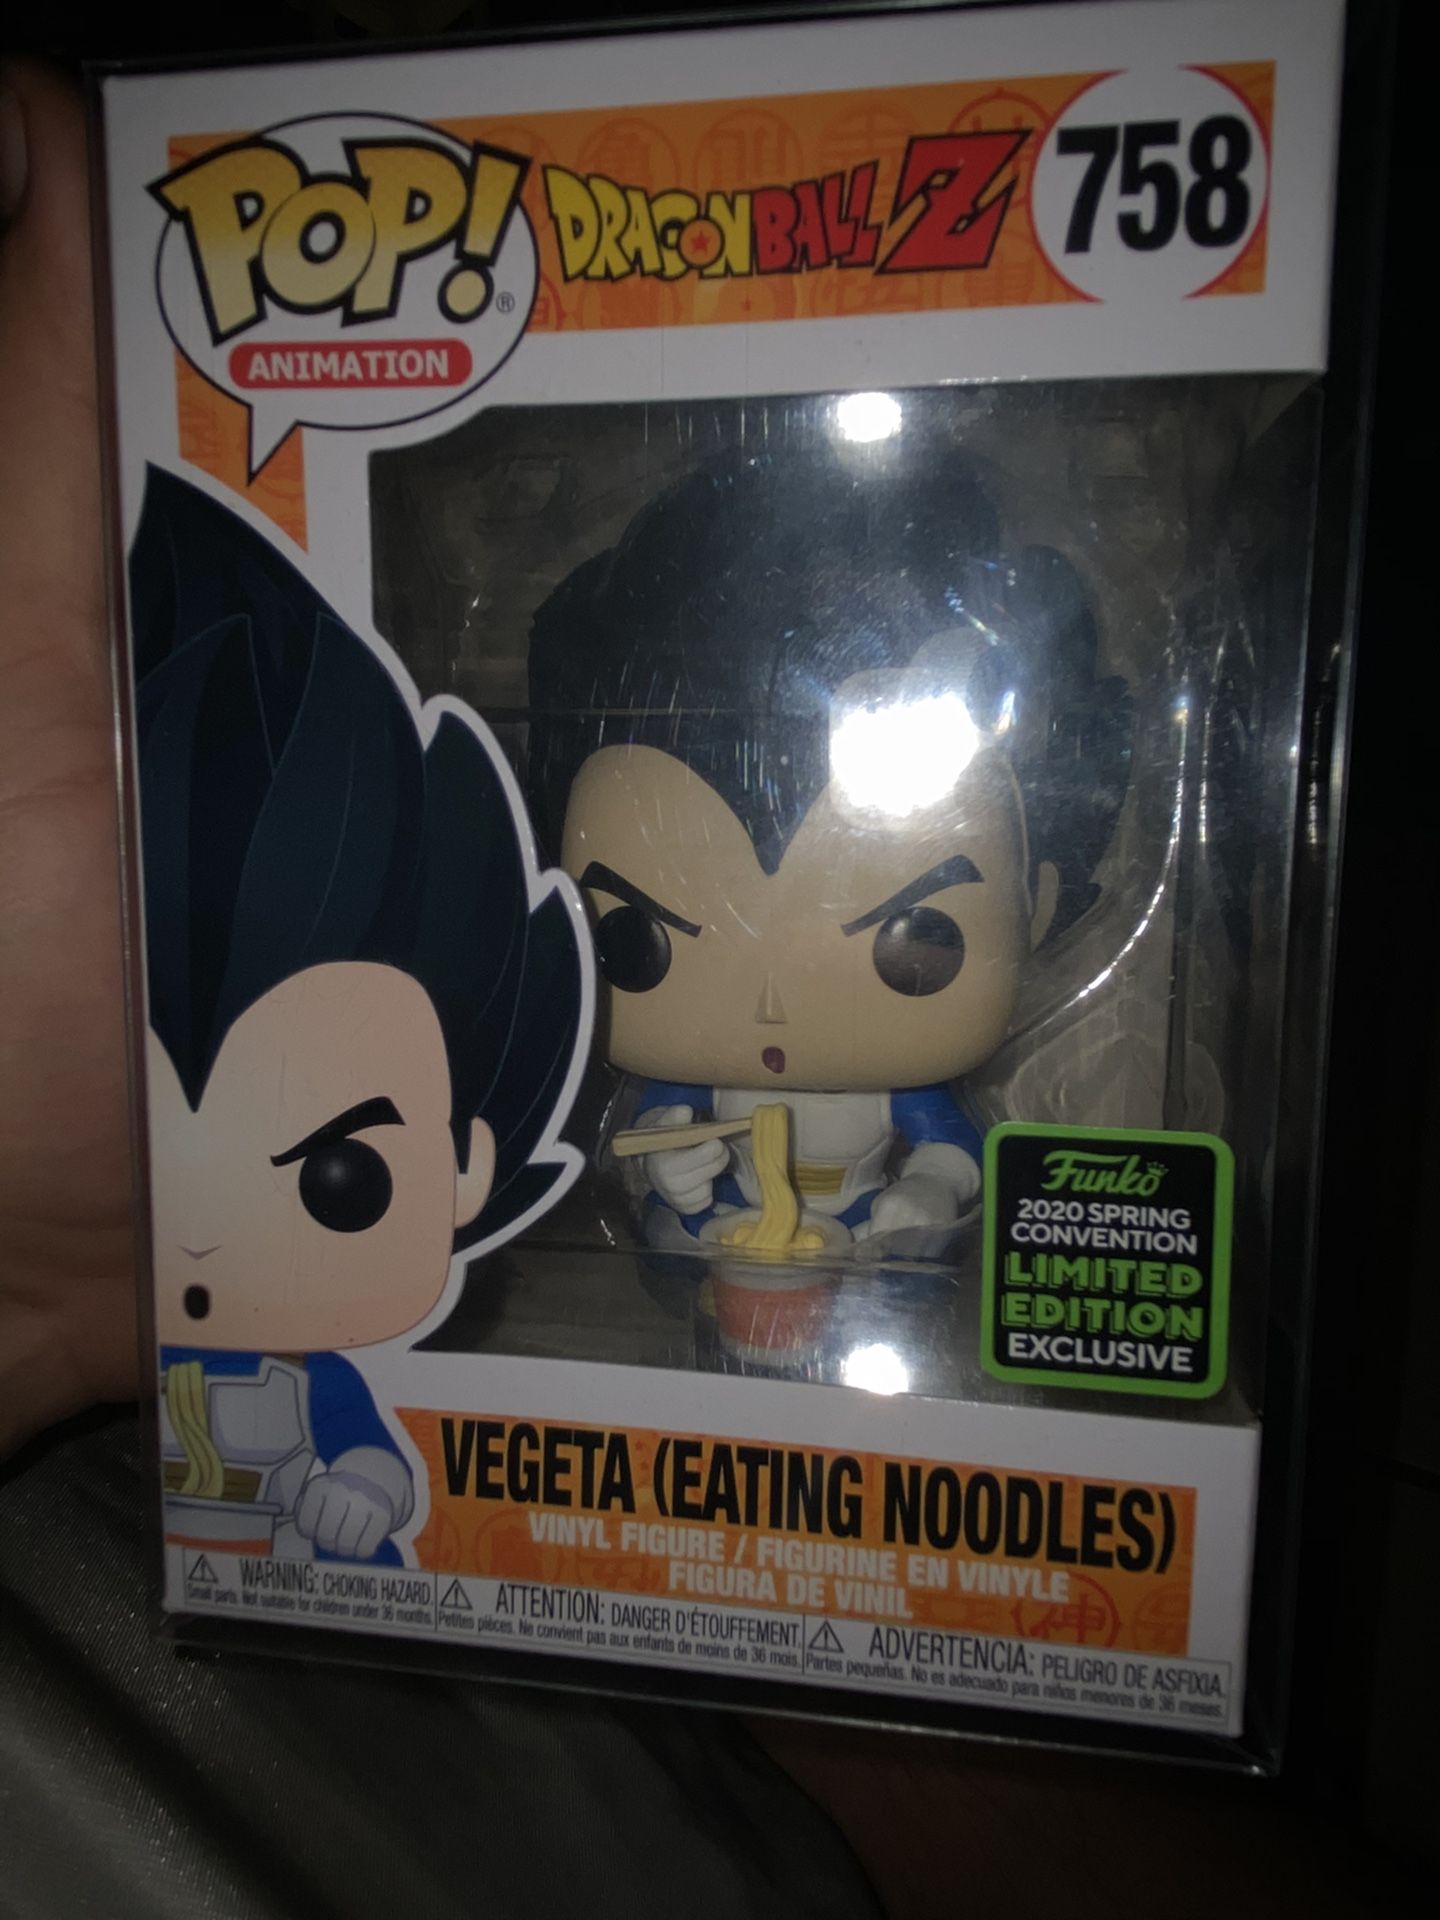 Funko Pop Vegeta (eating noodles) from Dragonball Z 2020 spring convention limited edition